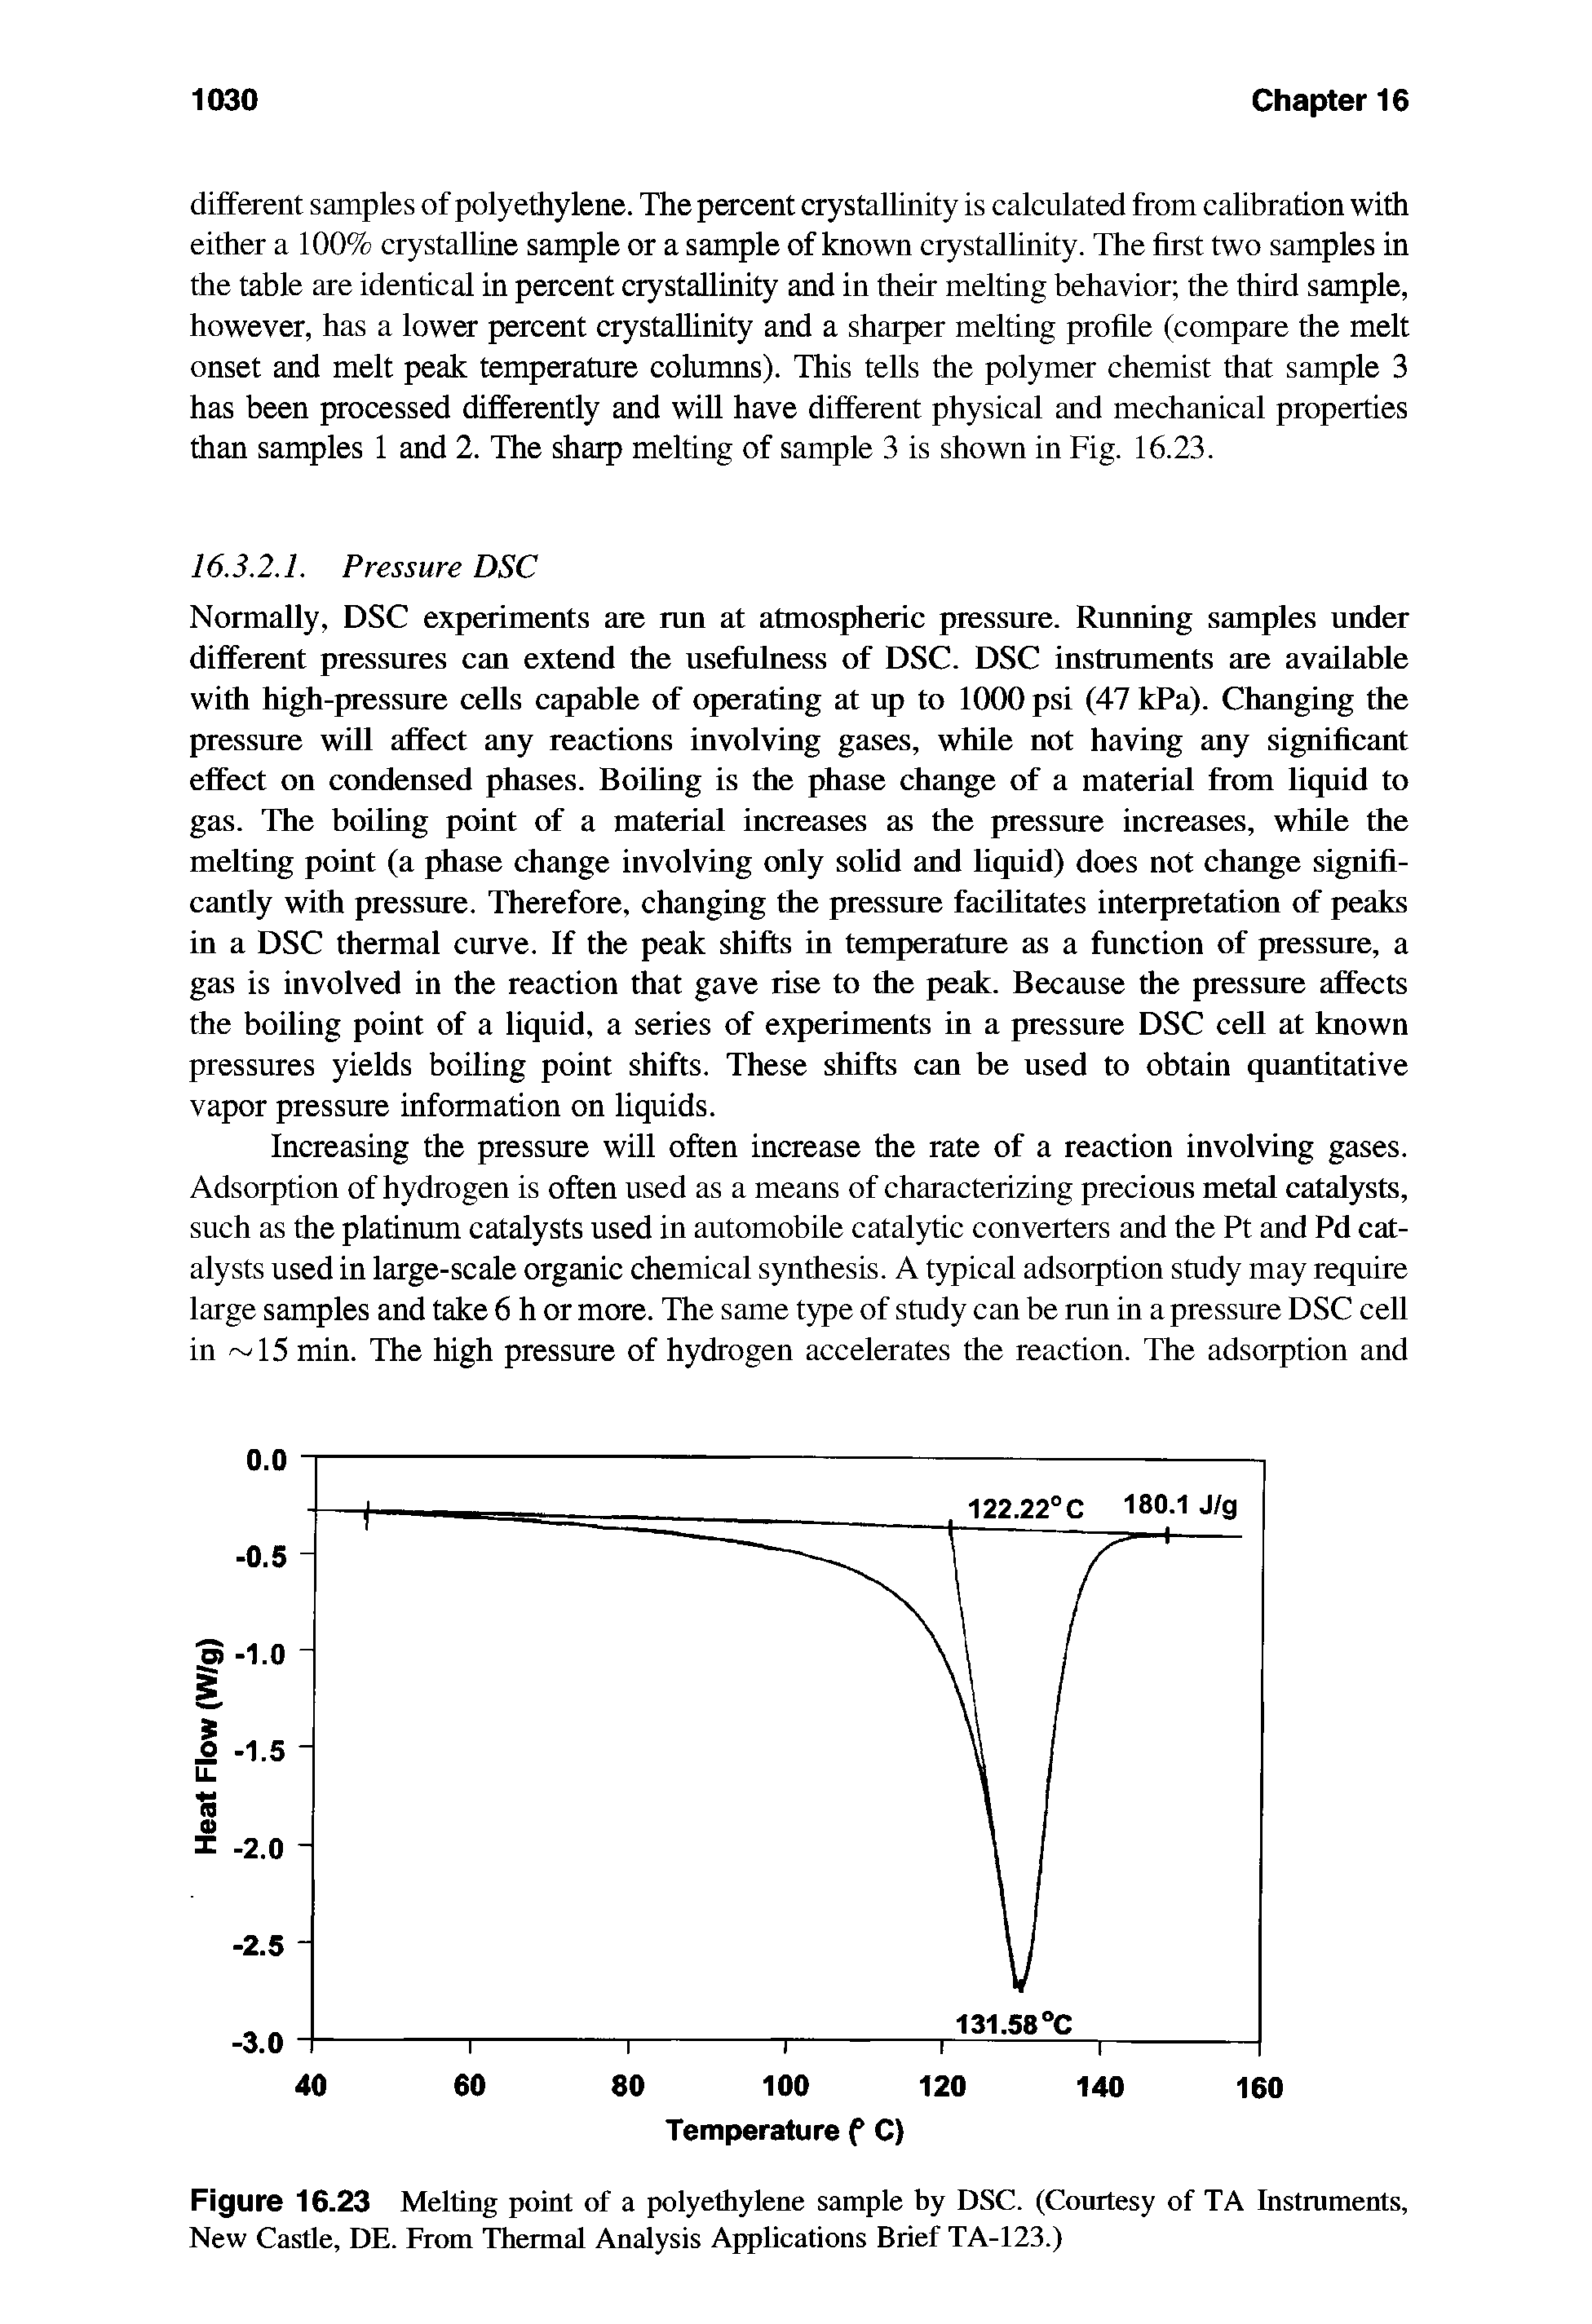 Figure 16.23 Melting point of a polyethylene sample by DSC. (Courtesy of TA Instruments, New Castle, DE. From Thermal Analysis Applications Brief TA-123.)...